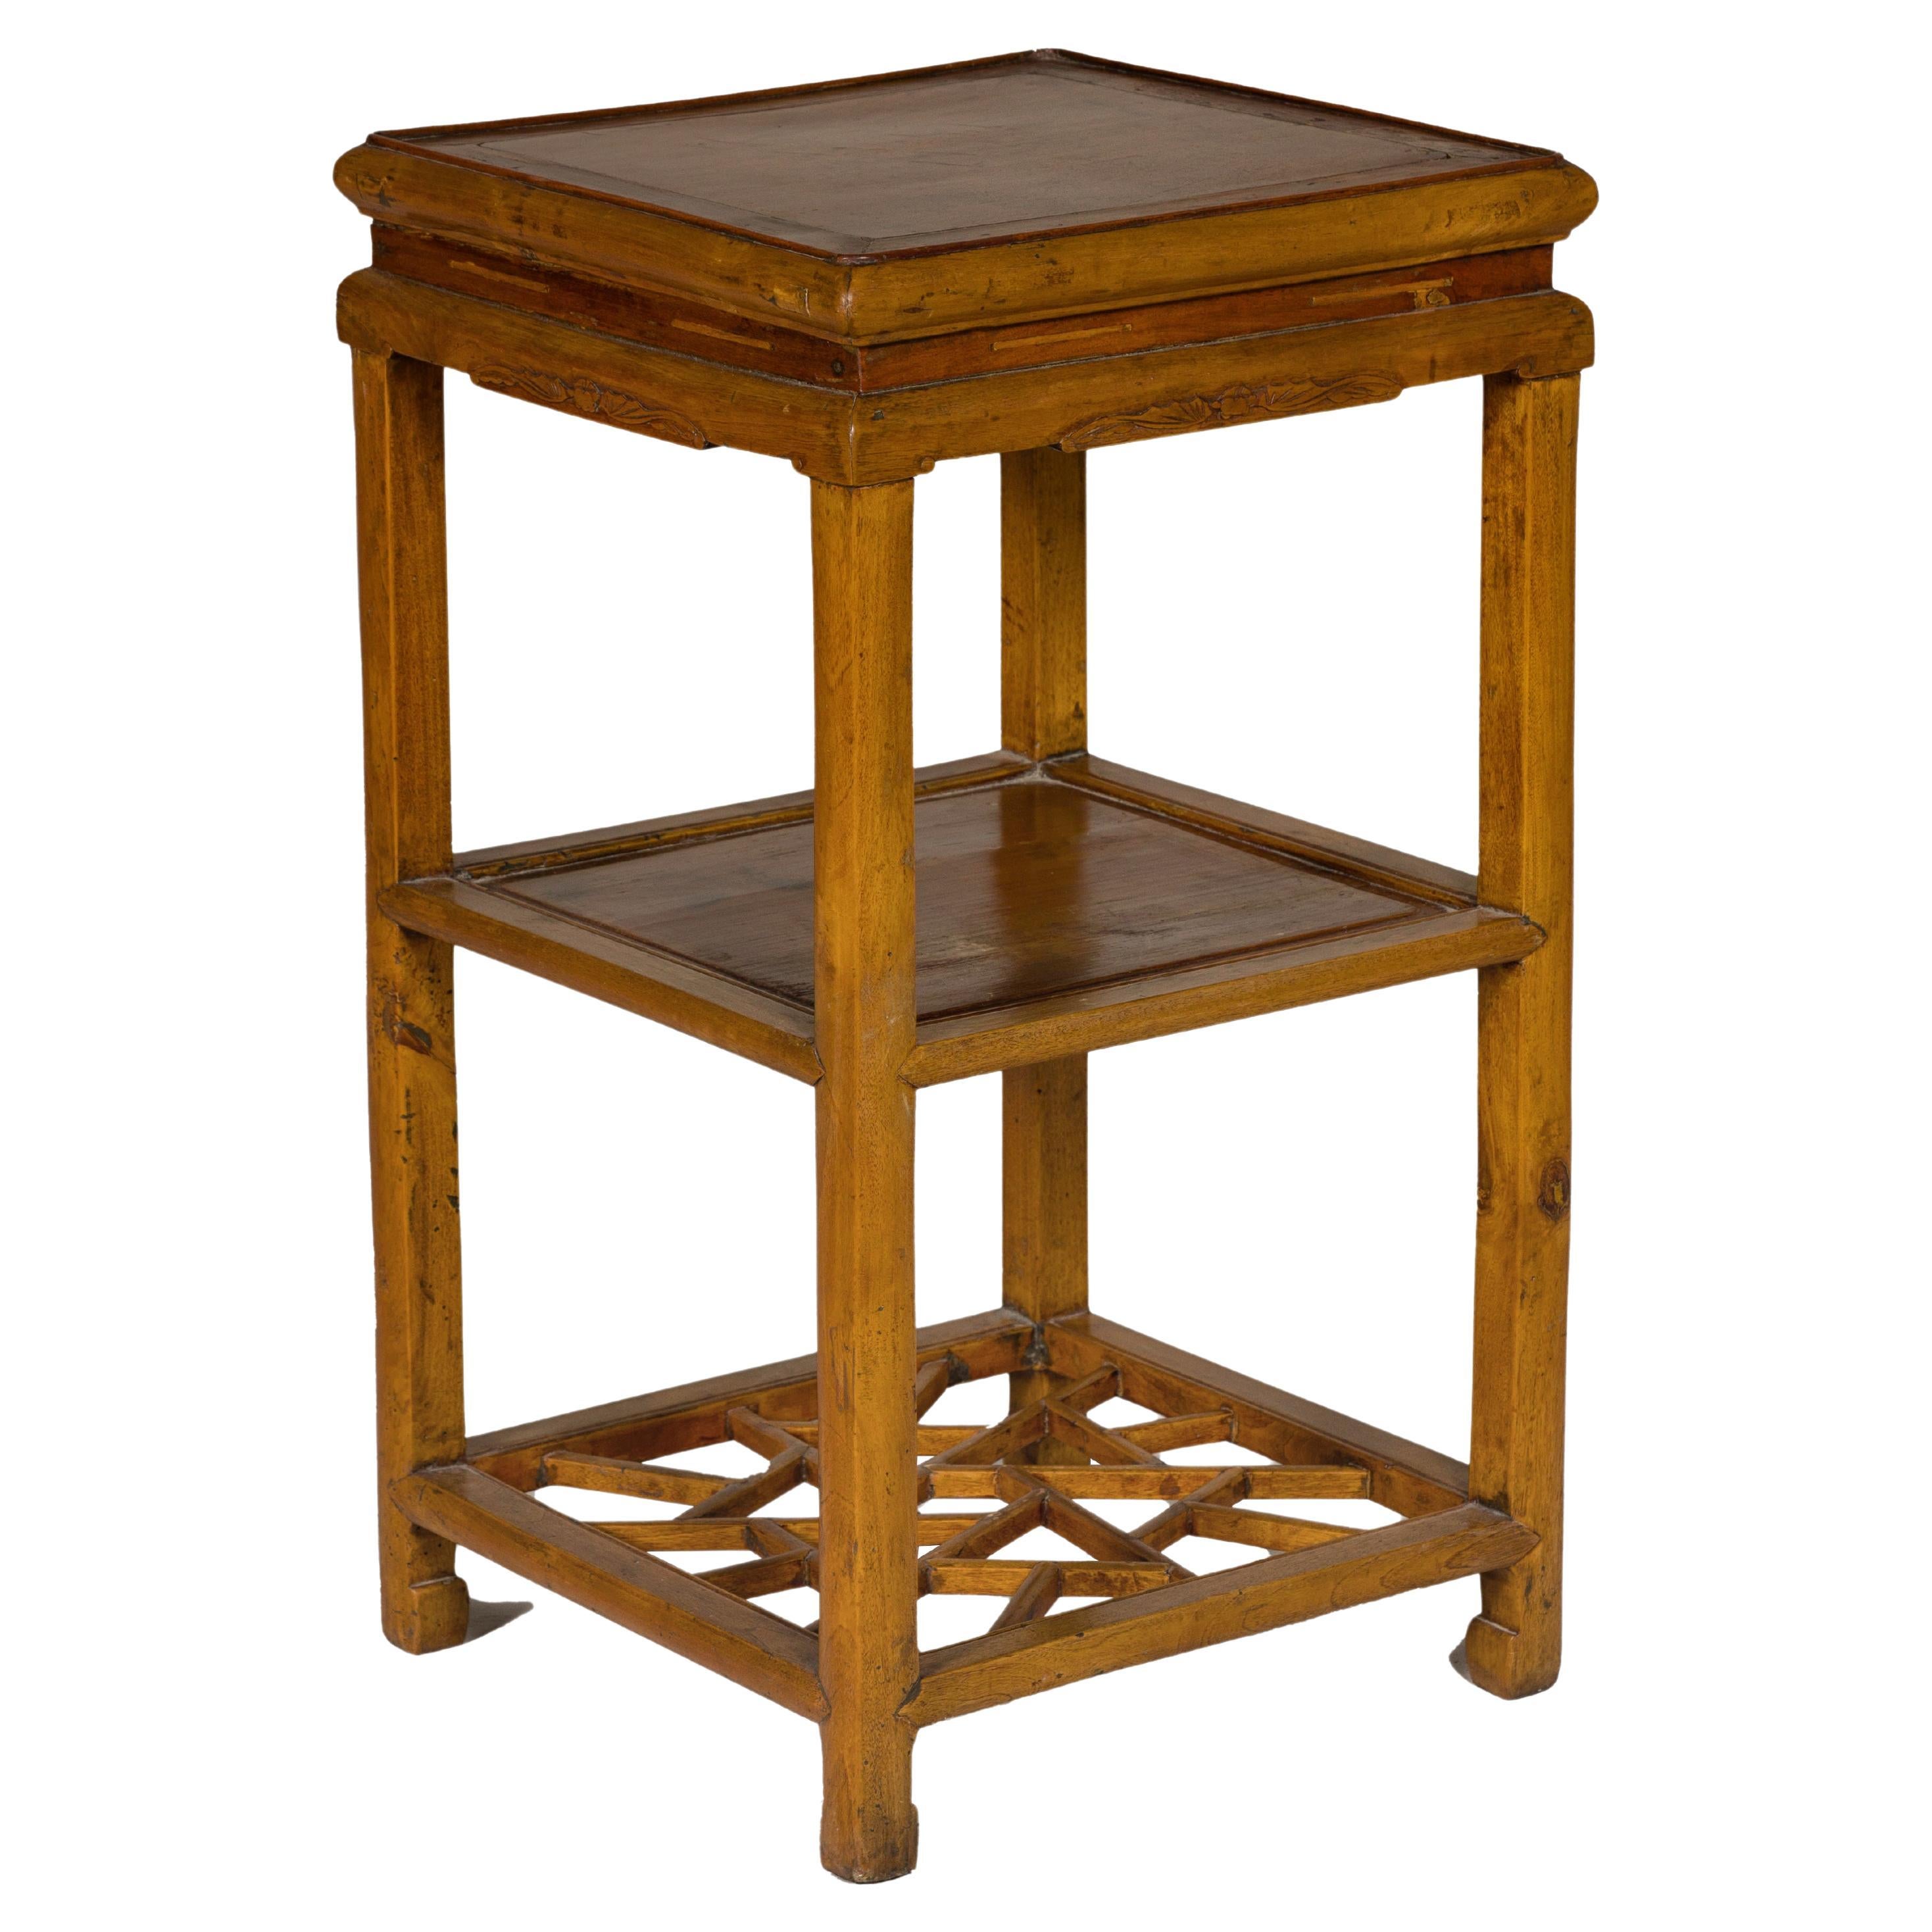 Qing Dynasty Three-Tier Accent Lamp Table with Geometric Shelf